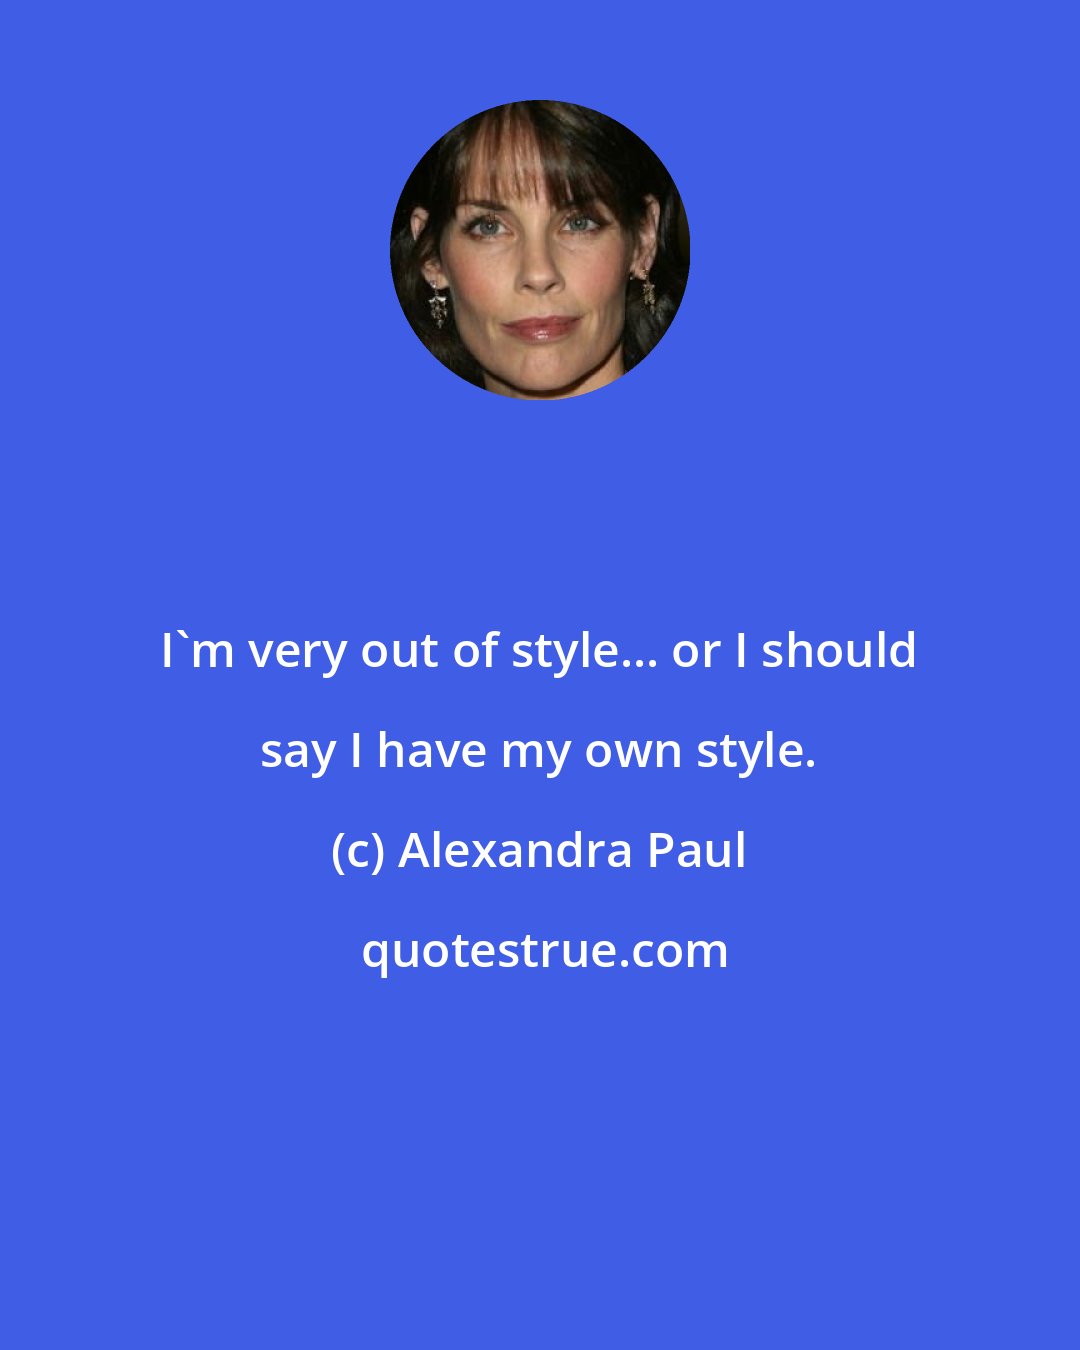 Alexandra Paul: I'm very out of style... or I should say I have my own style.